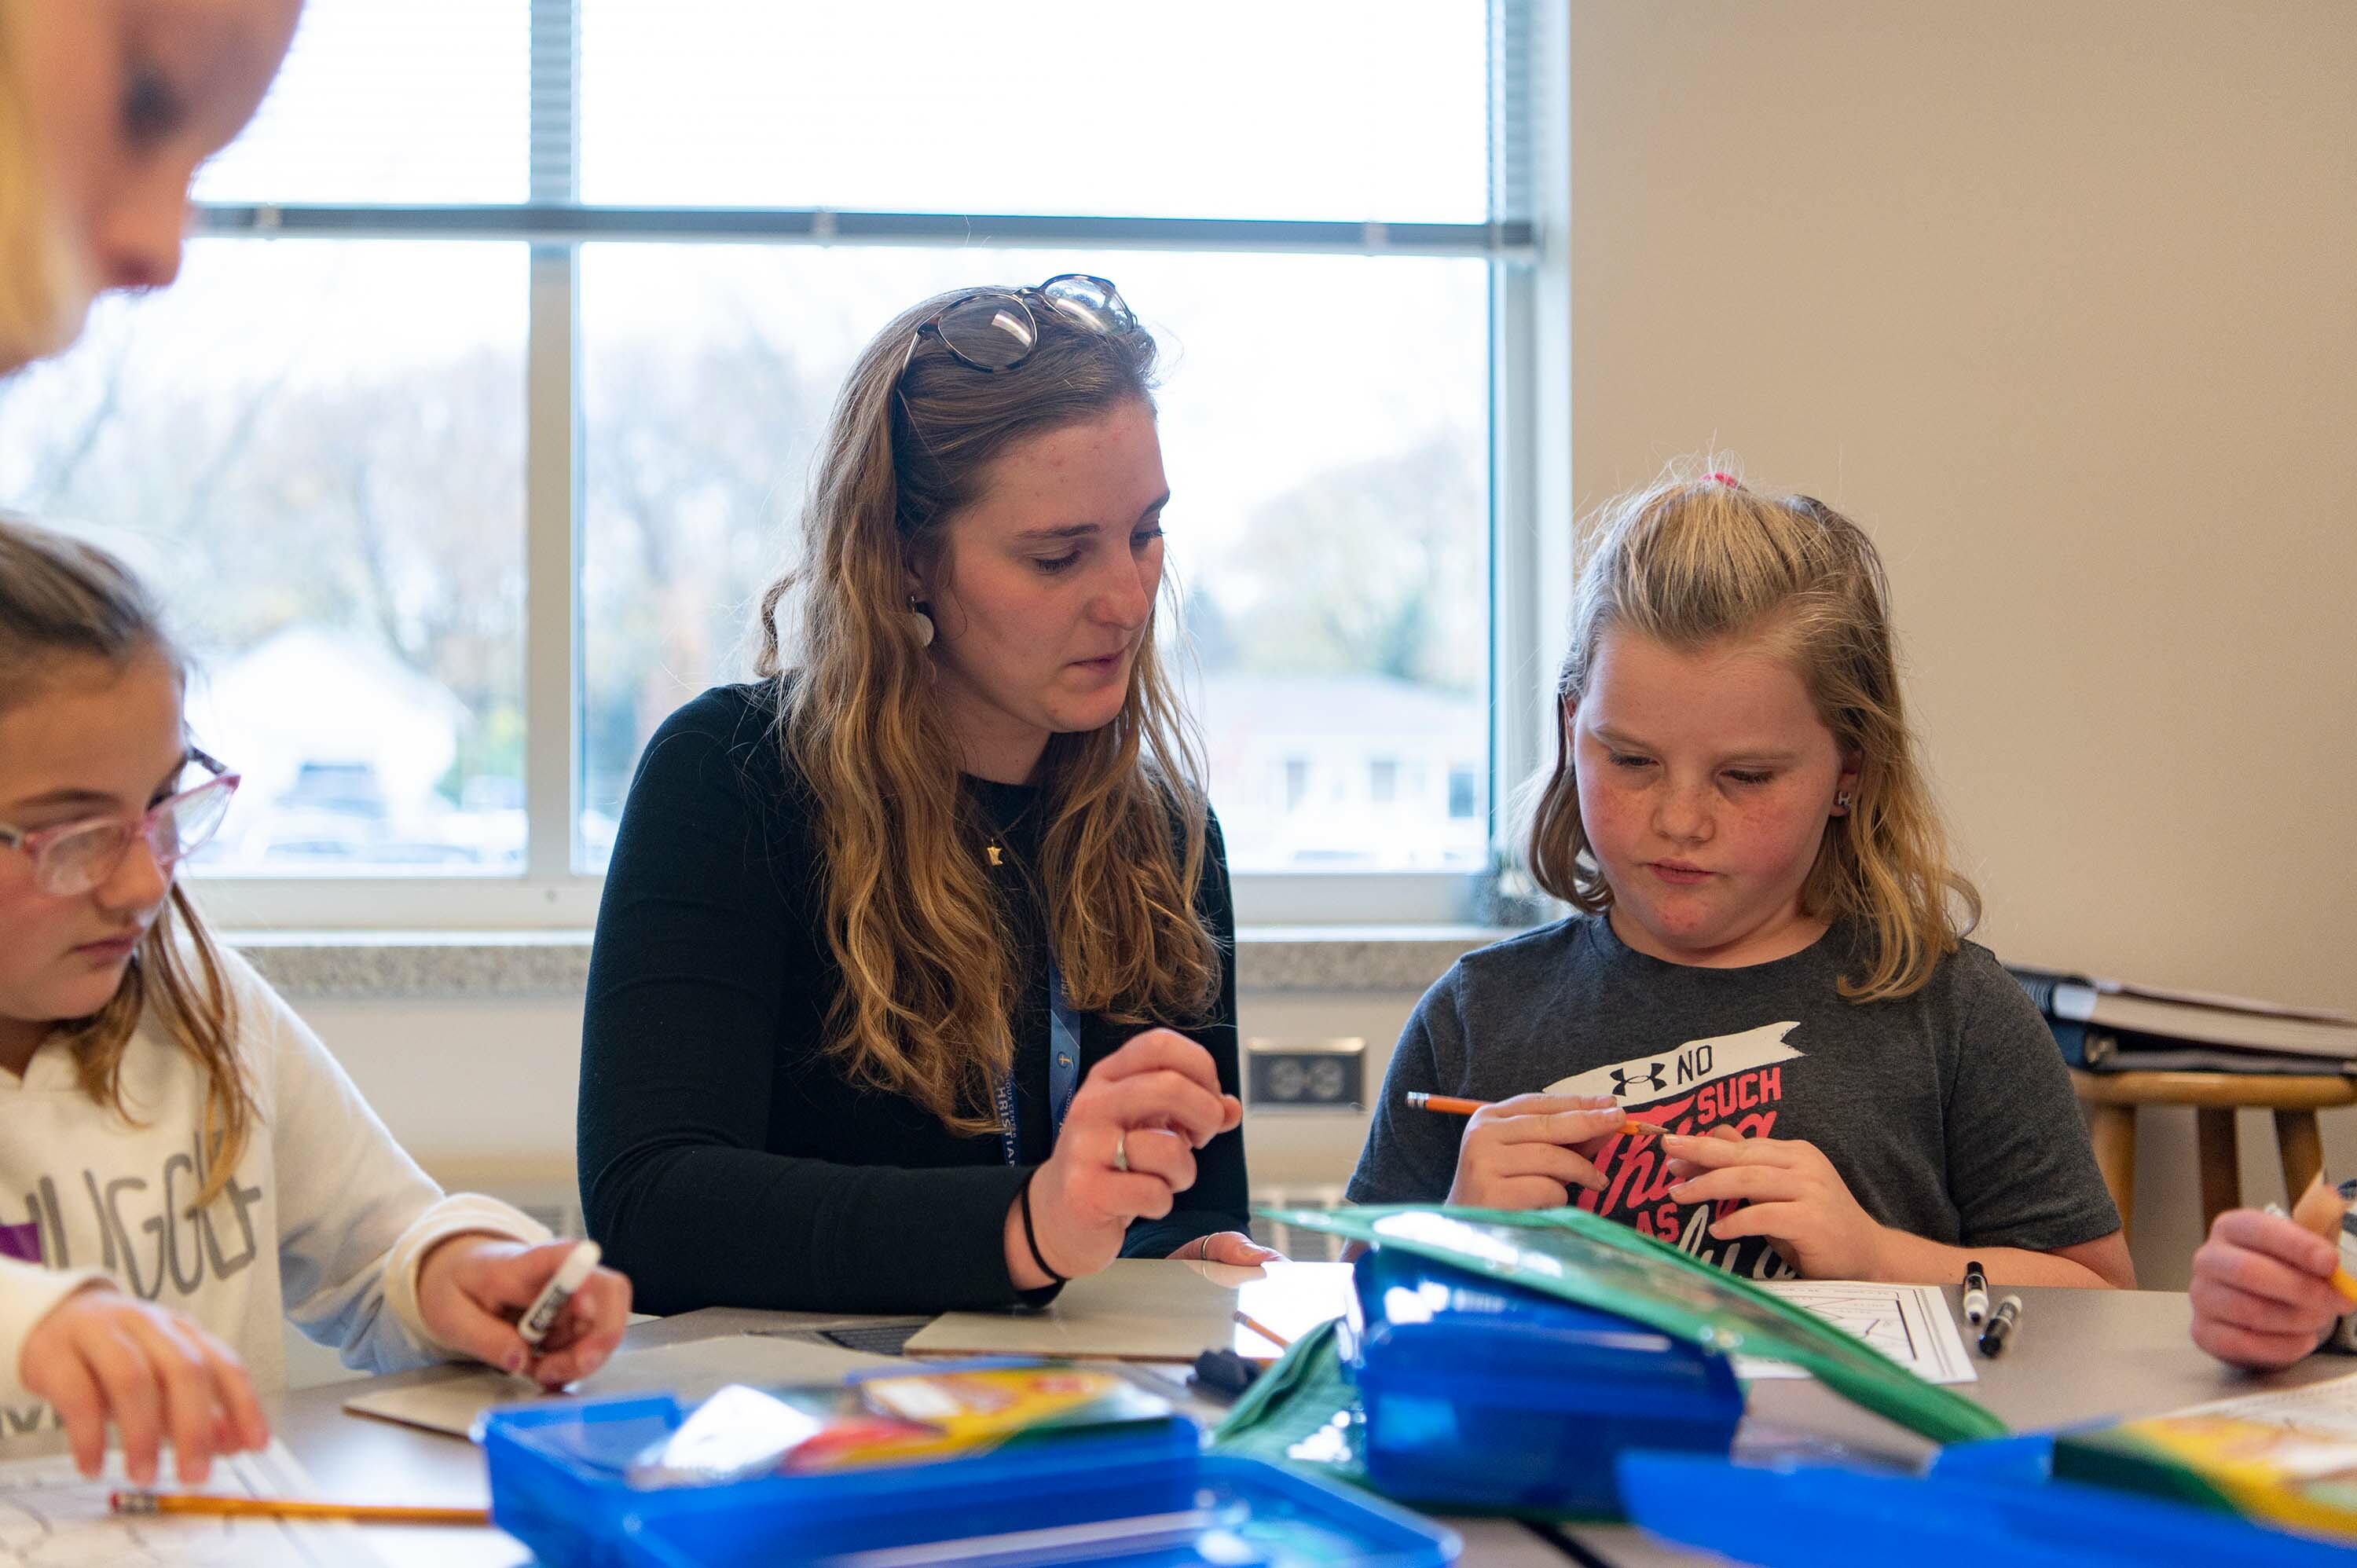 A female Dordt student works with a younger student at an elementary school